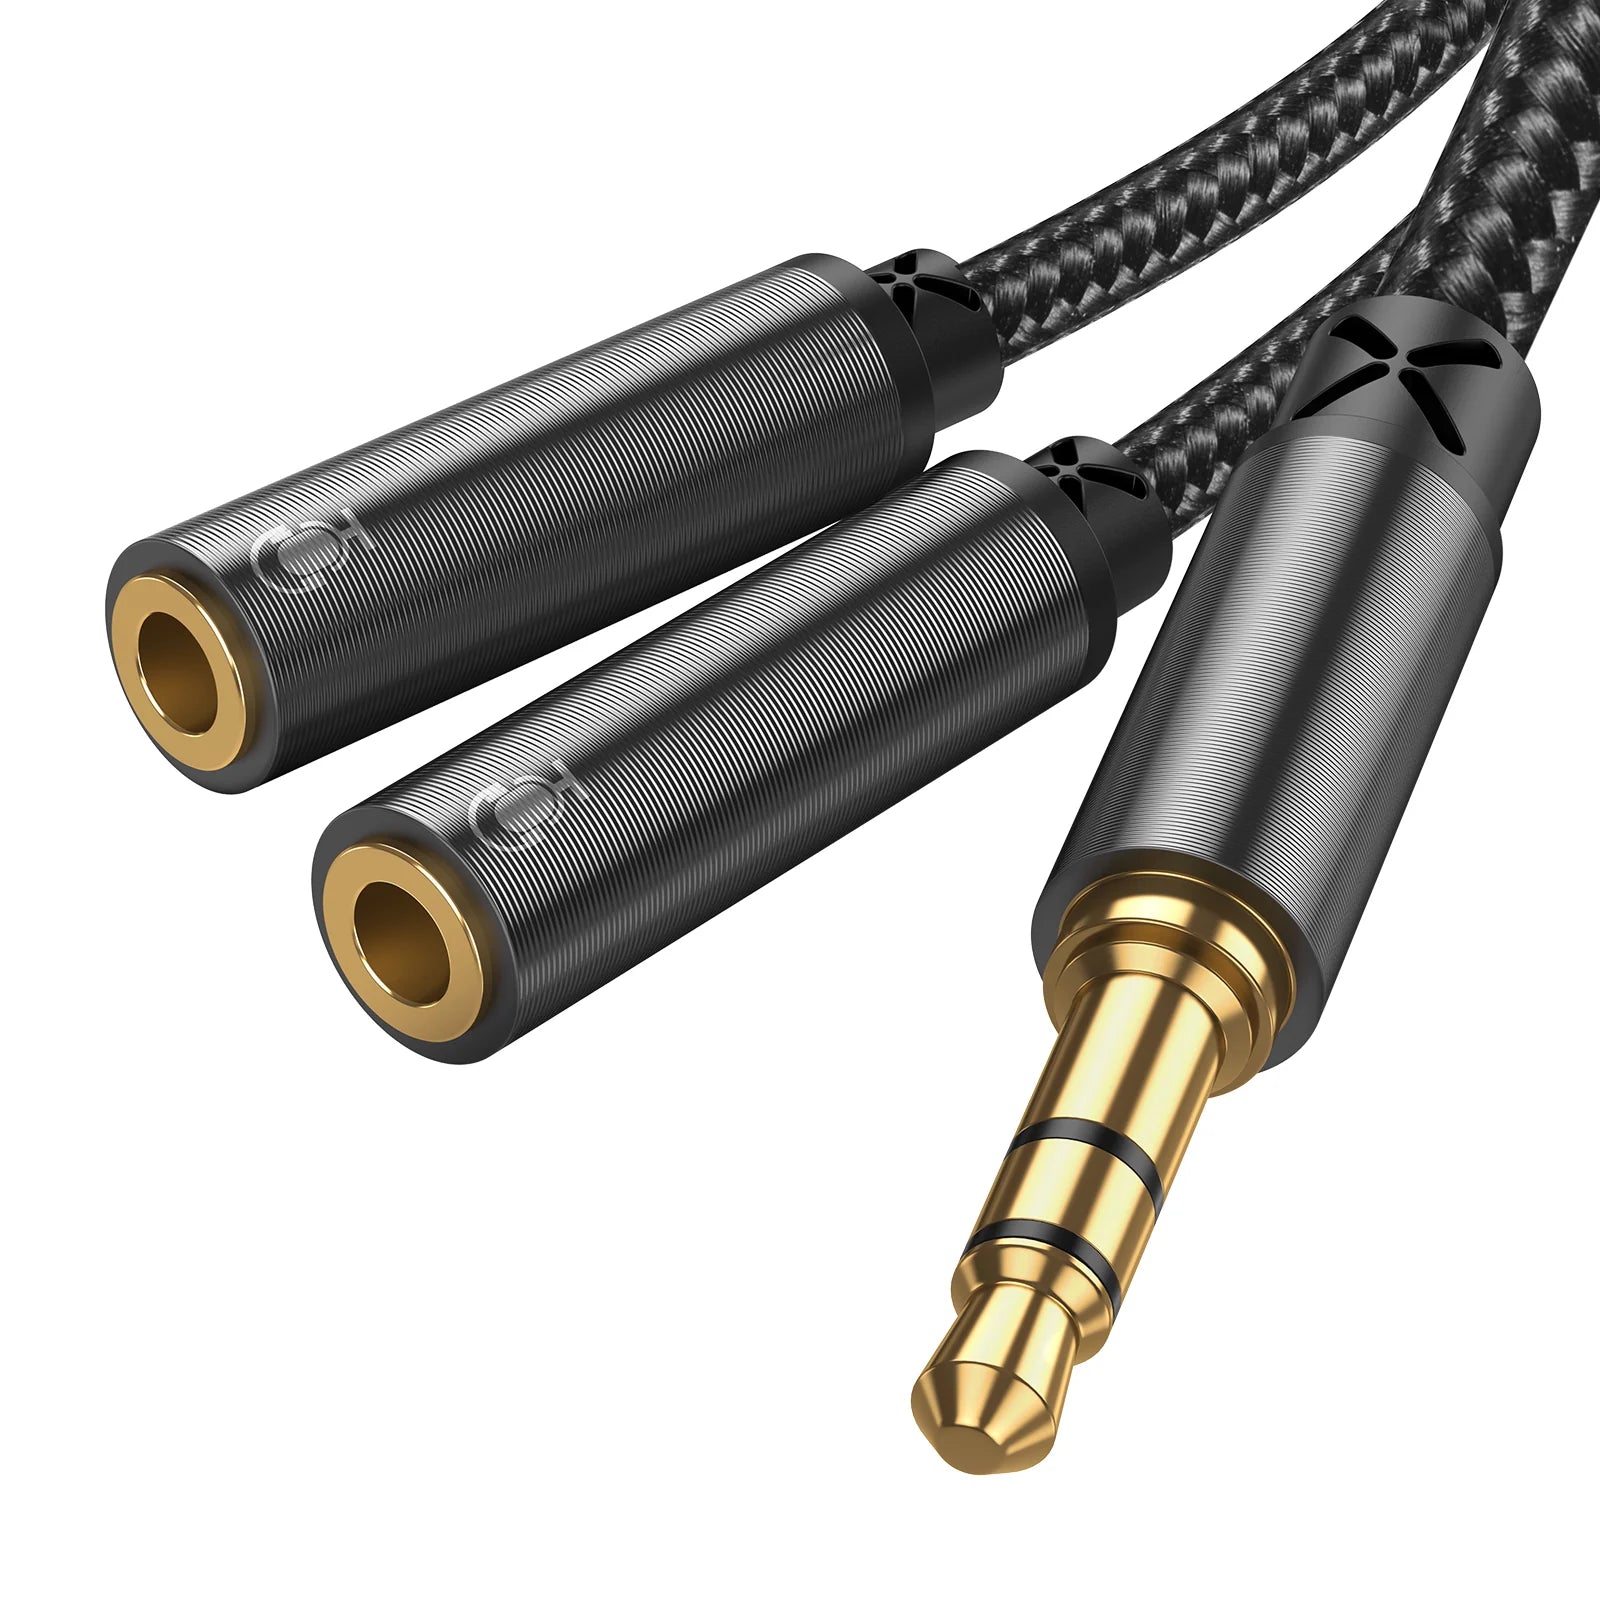 Joyroom SY-A04 Headphone male to 2-female Y-splitter audio cable 0.2m-black